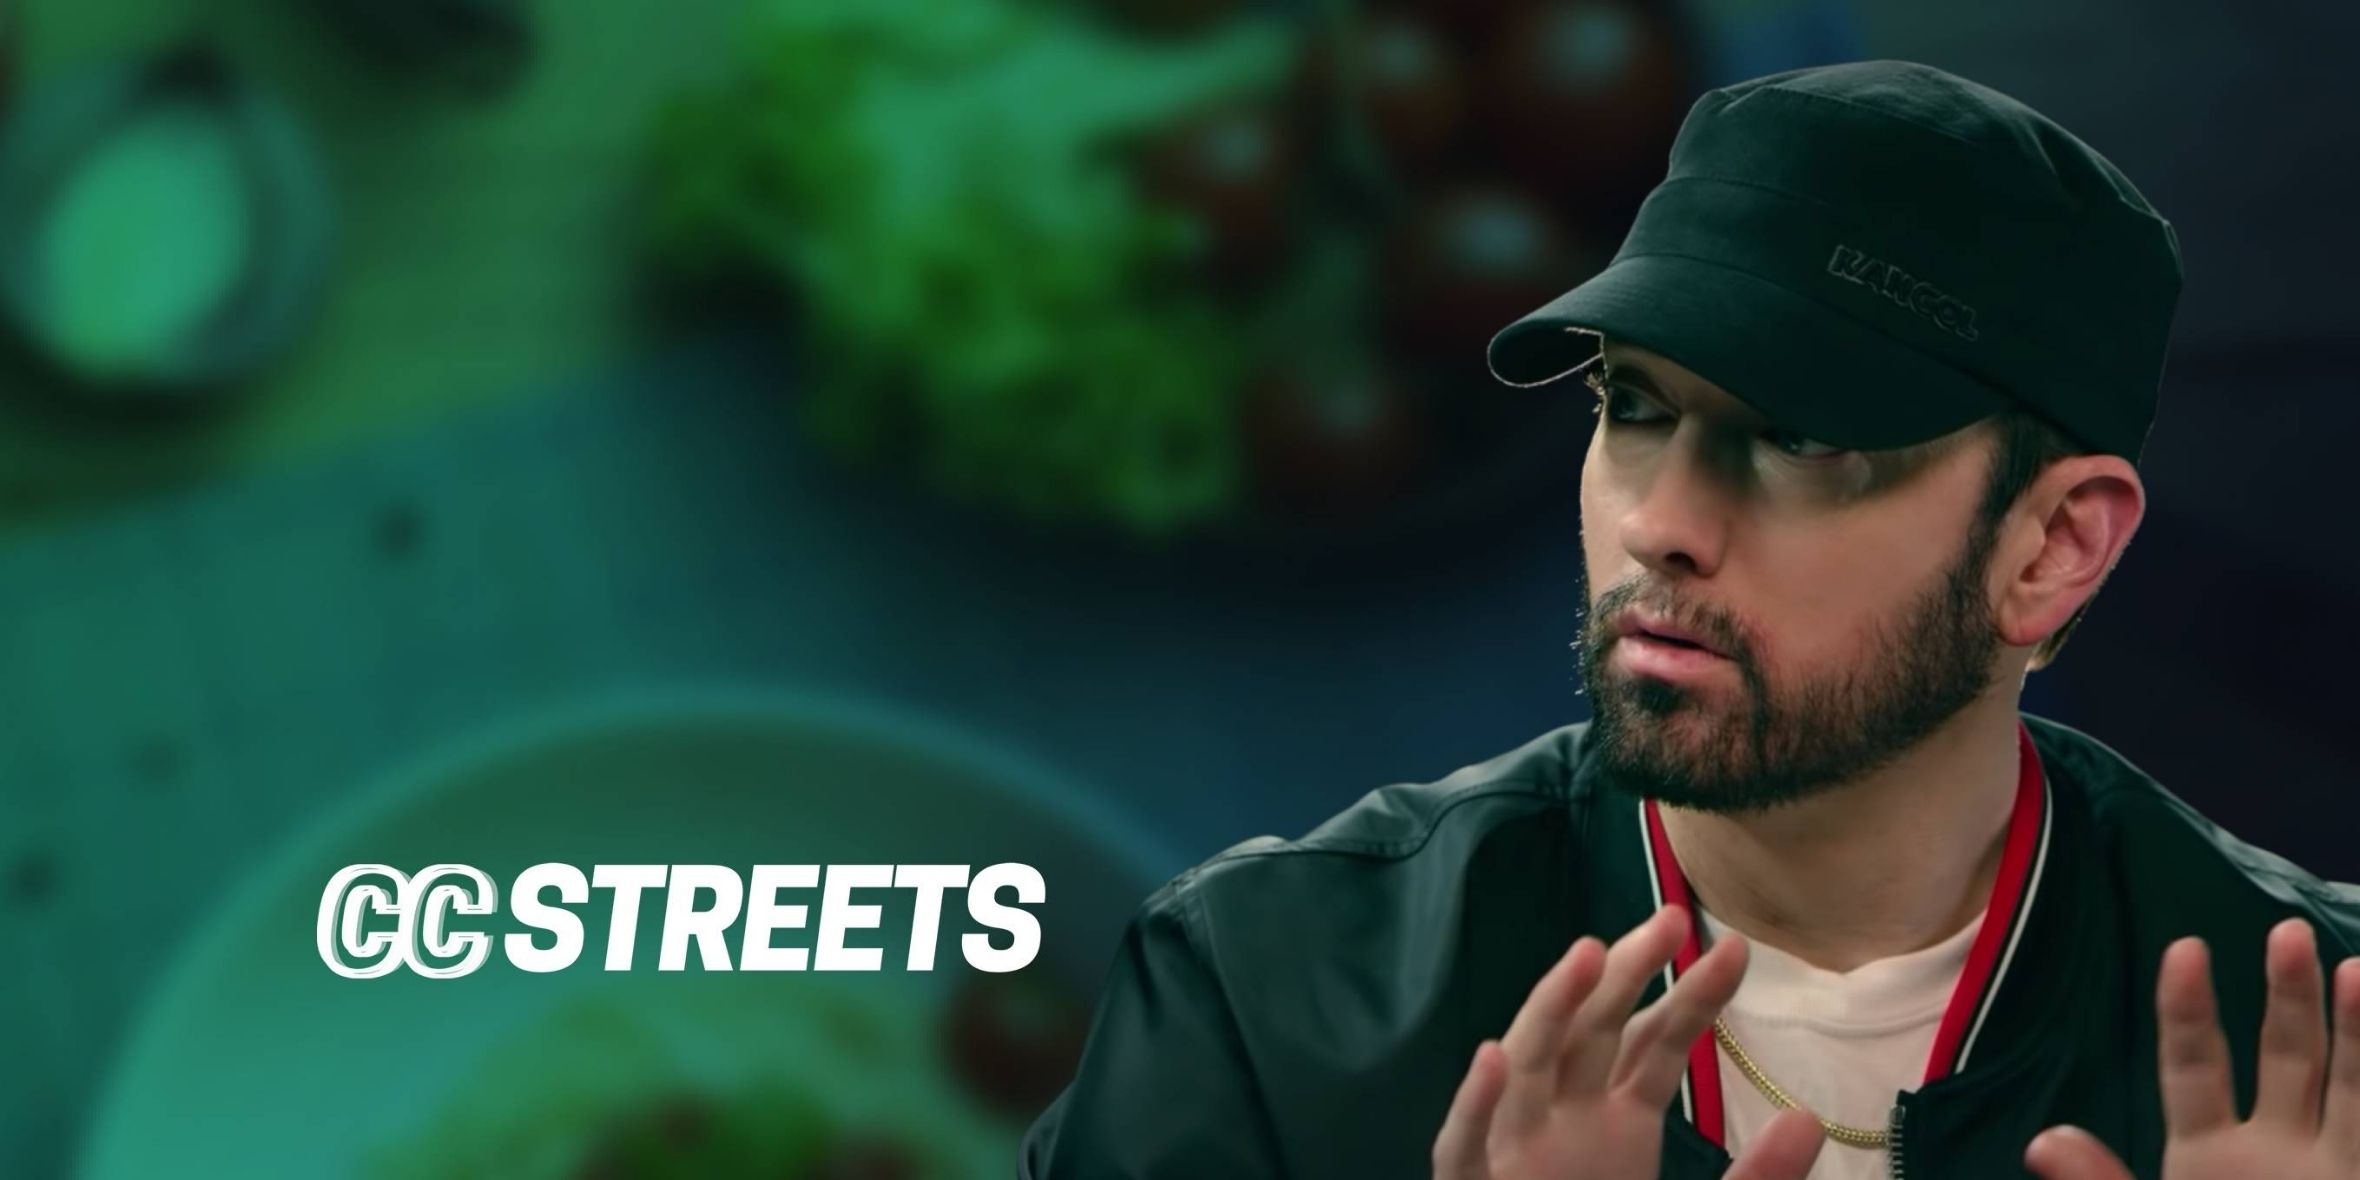 With this rhyme, rapper Eminem conquered the world.  According to him, he is now opening his own Mom's Spaghetti spaghetti factory thumbnail